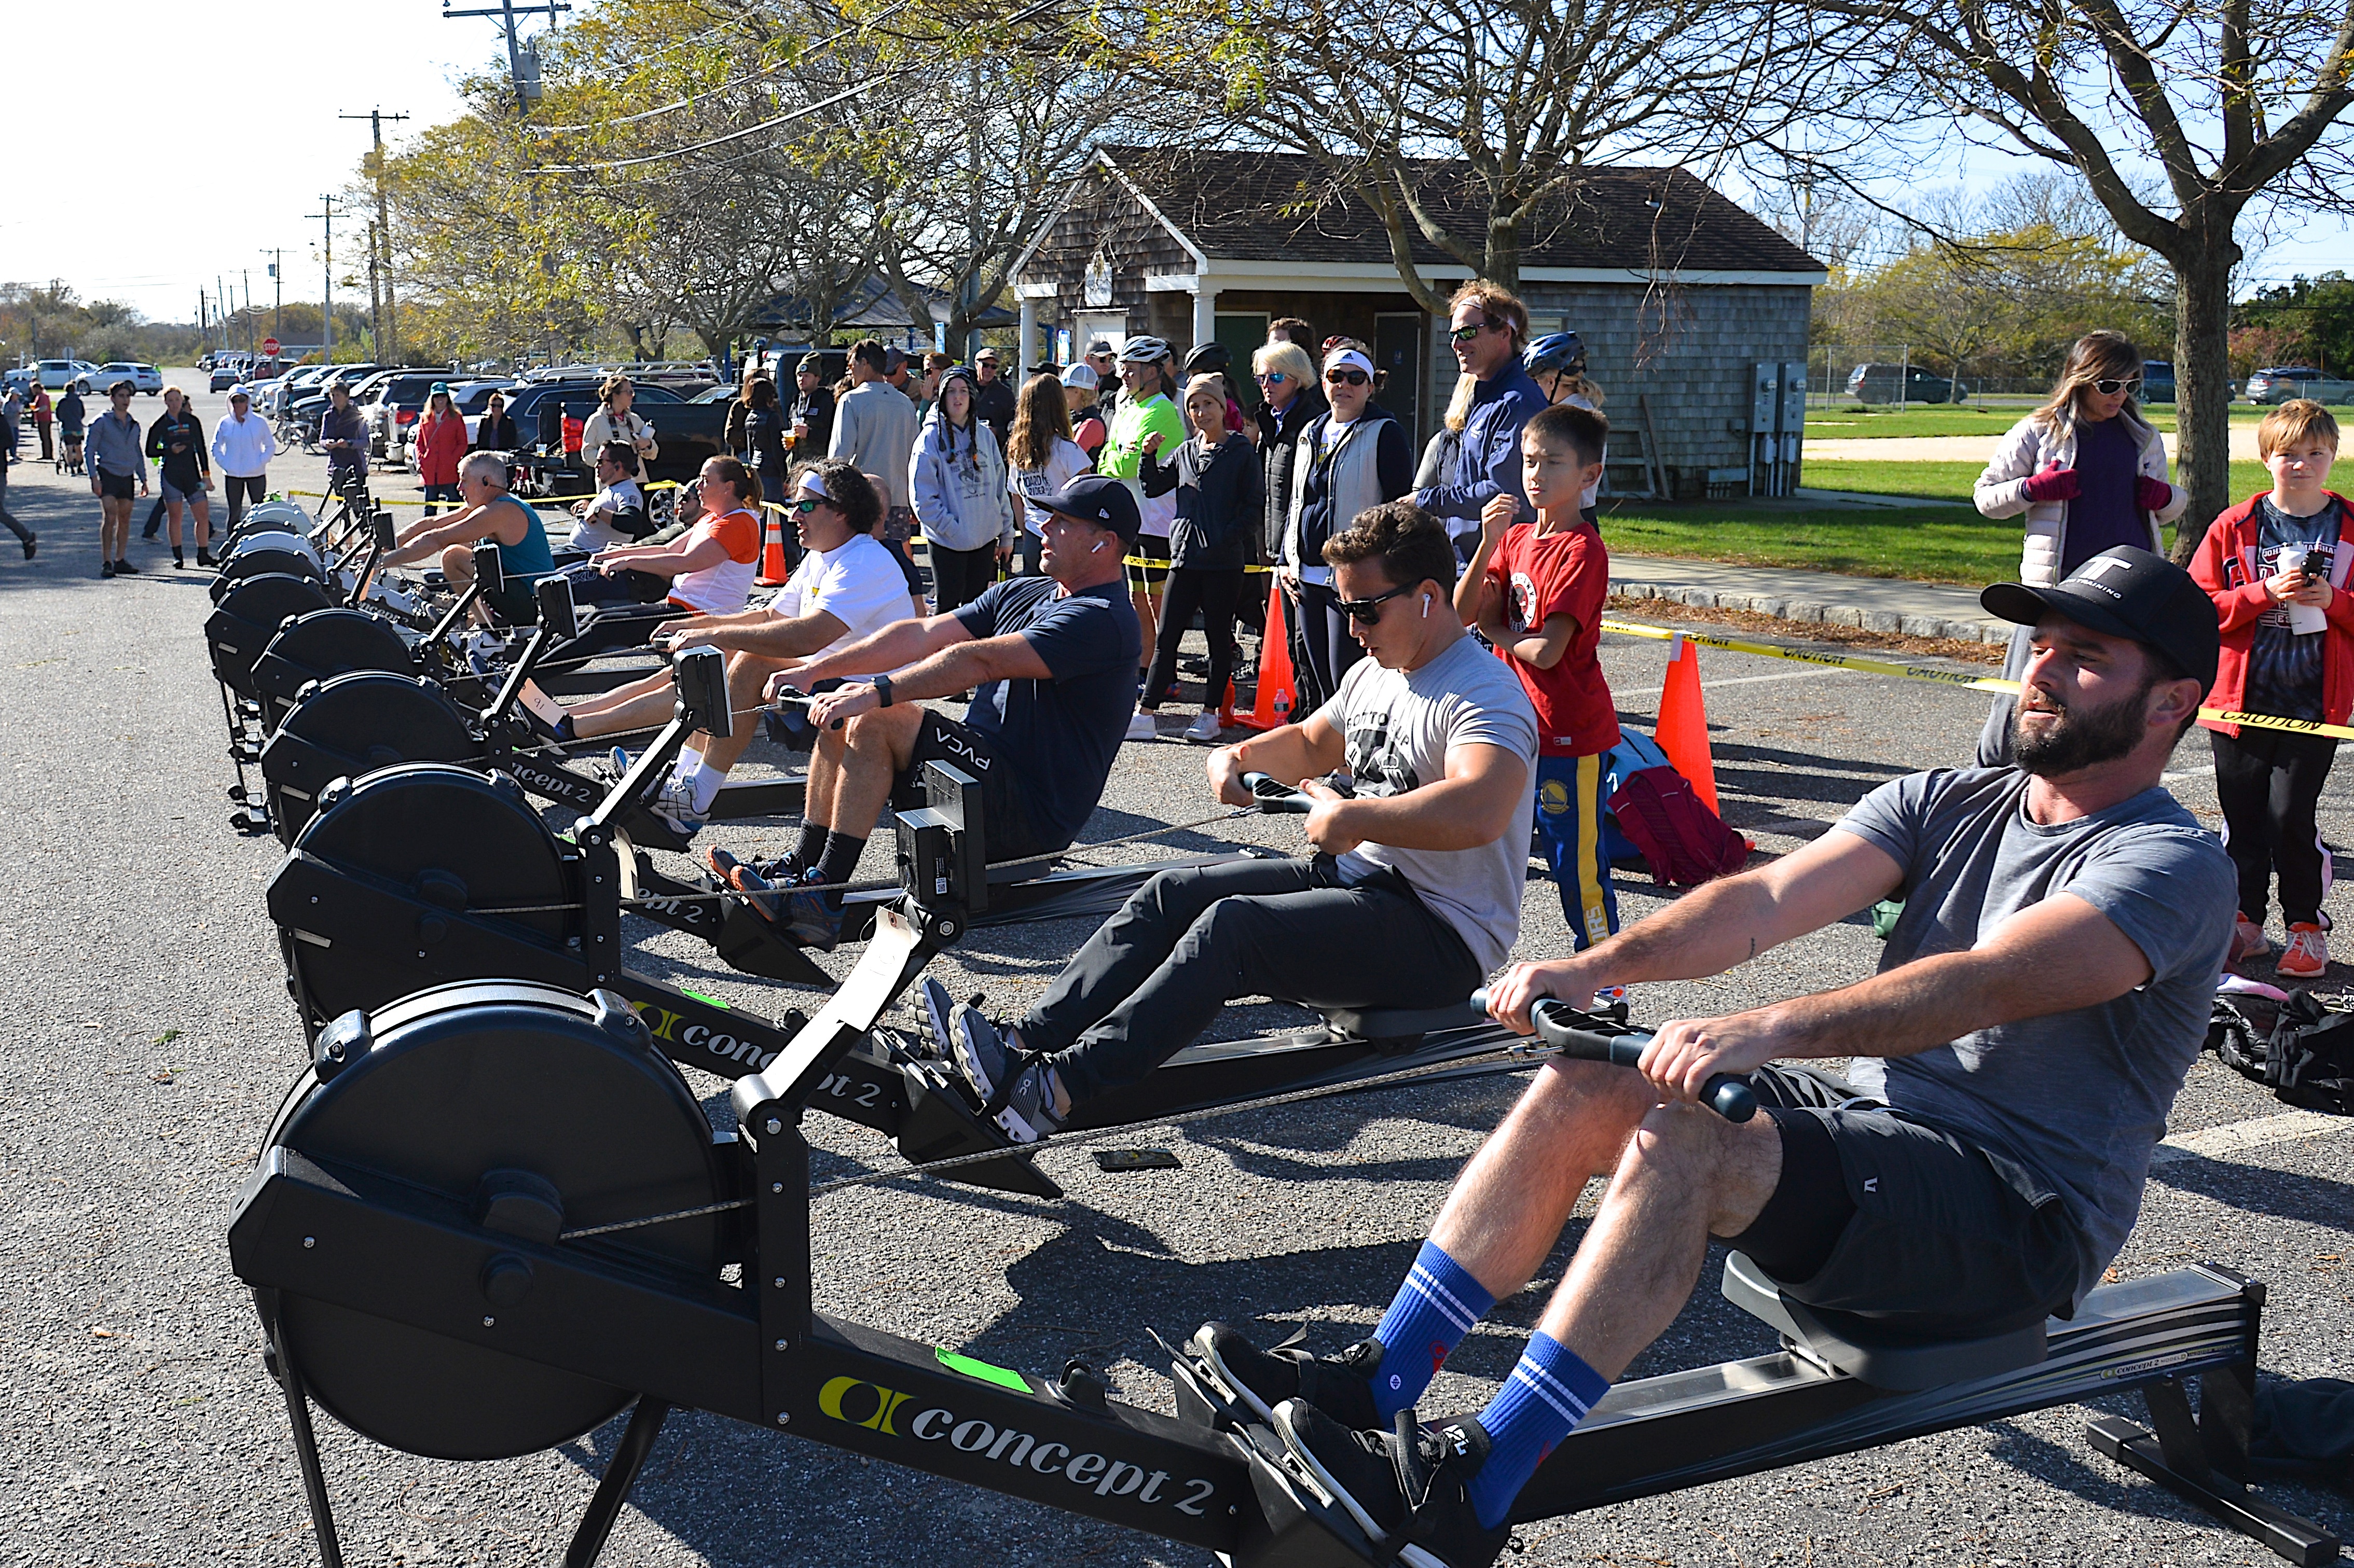 The annual Brew-athlon, to benefit the Old Montauk Athletic Club, had a sunny day for competitors who teamed up to row, bike, run and row on Saturday, starting at the Montauk Brewing Company. KYRIL BROMLEY